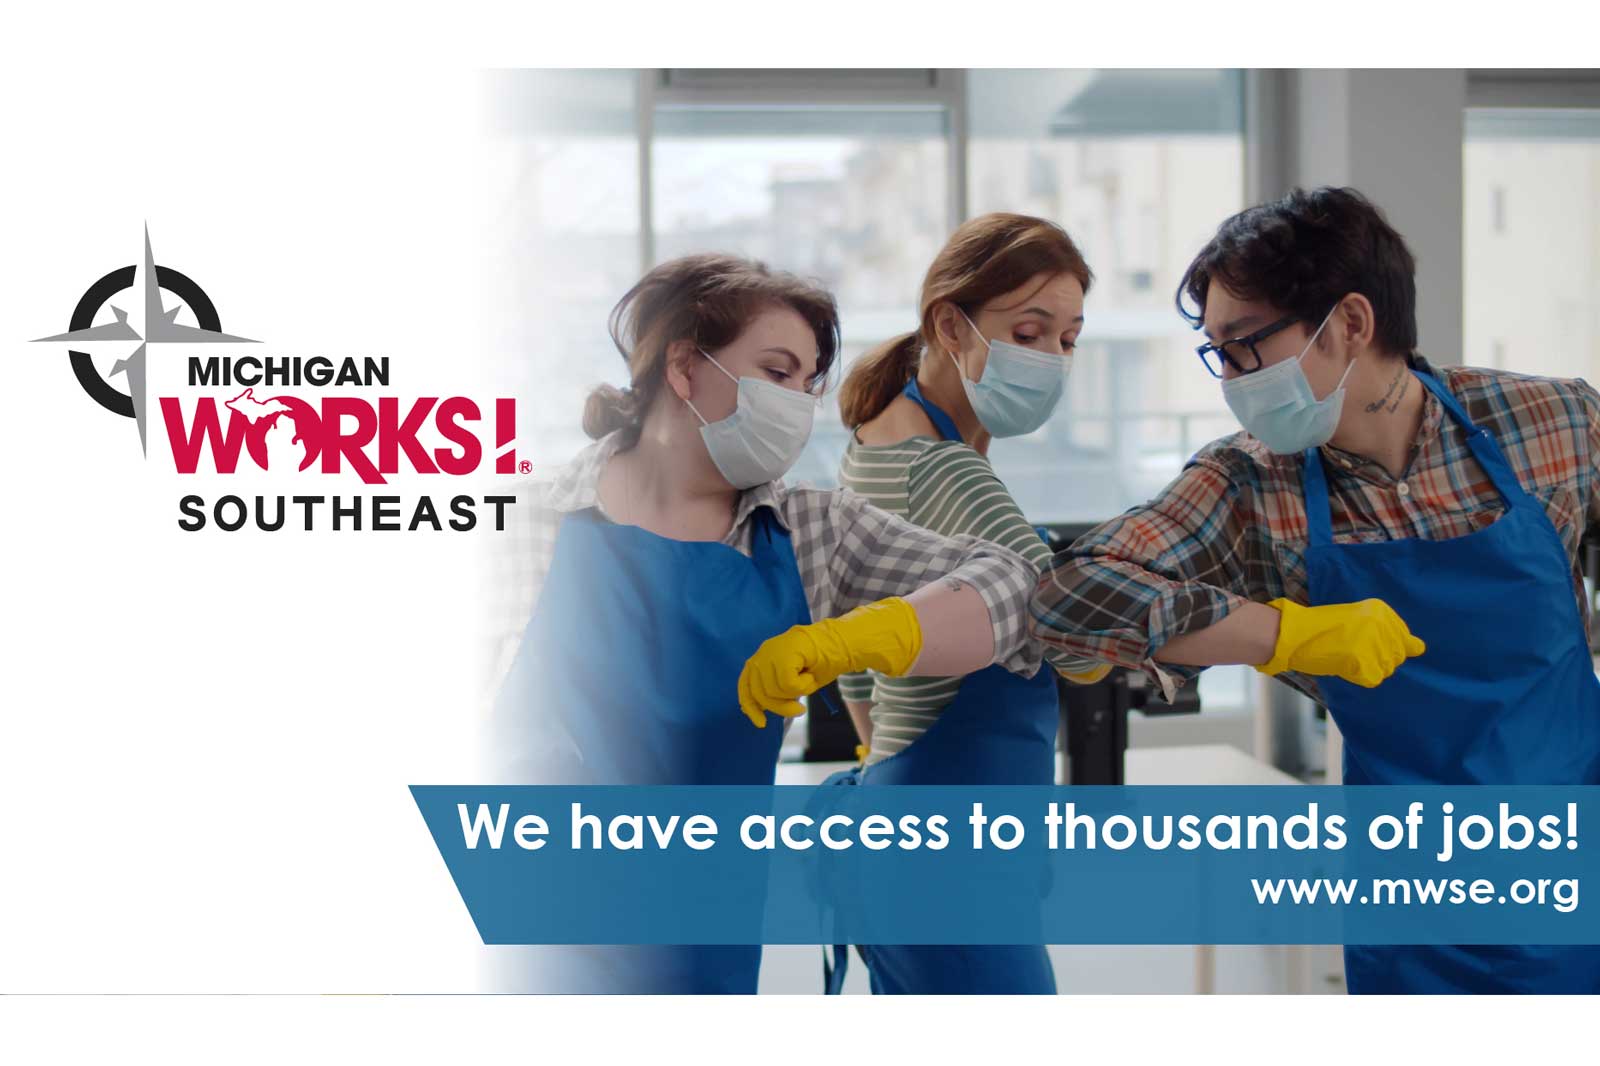 Michigan Works! Southeast: 1478 Jobs Available Right Now in Jackson County